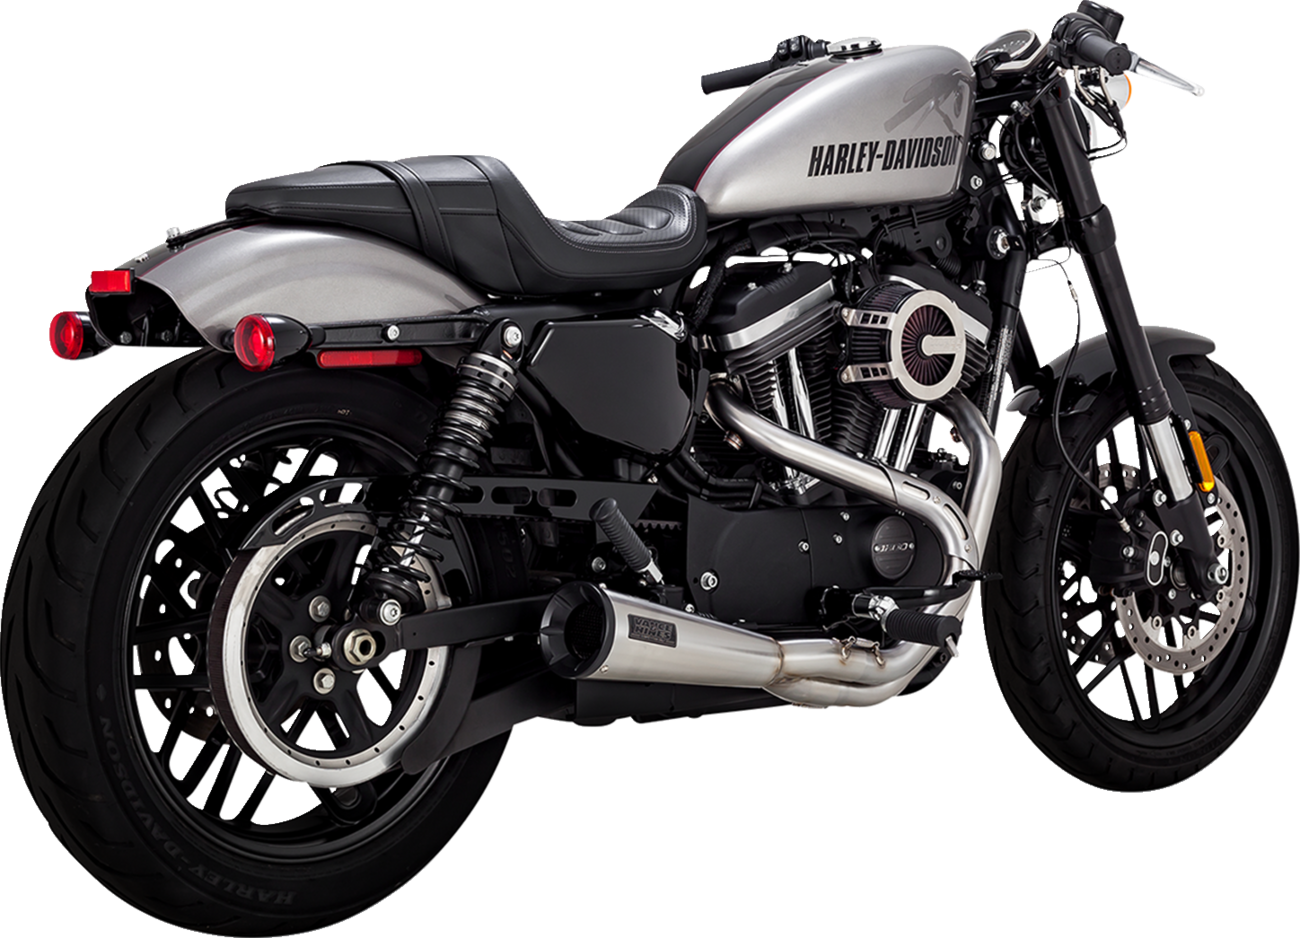 Vance & Hines 2-into-1 Upsweep Exhaust System for 2014-2022 Harley Sportster XL